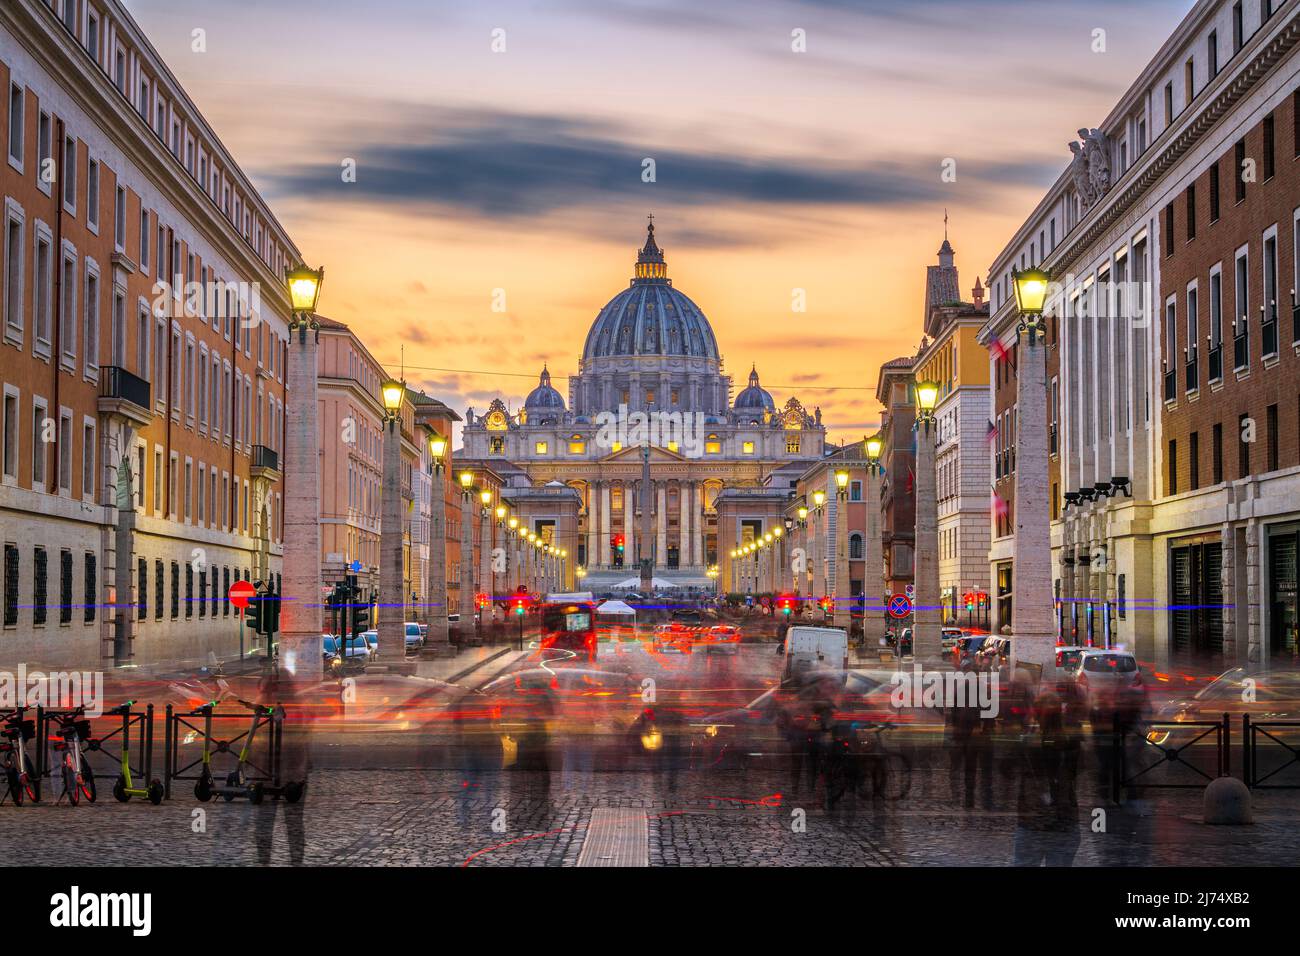 Vatican City, a city-state surrounded by Rome, Italy,  with St. Peter's Basilica at twilight. Stock Photo